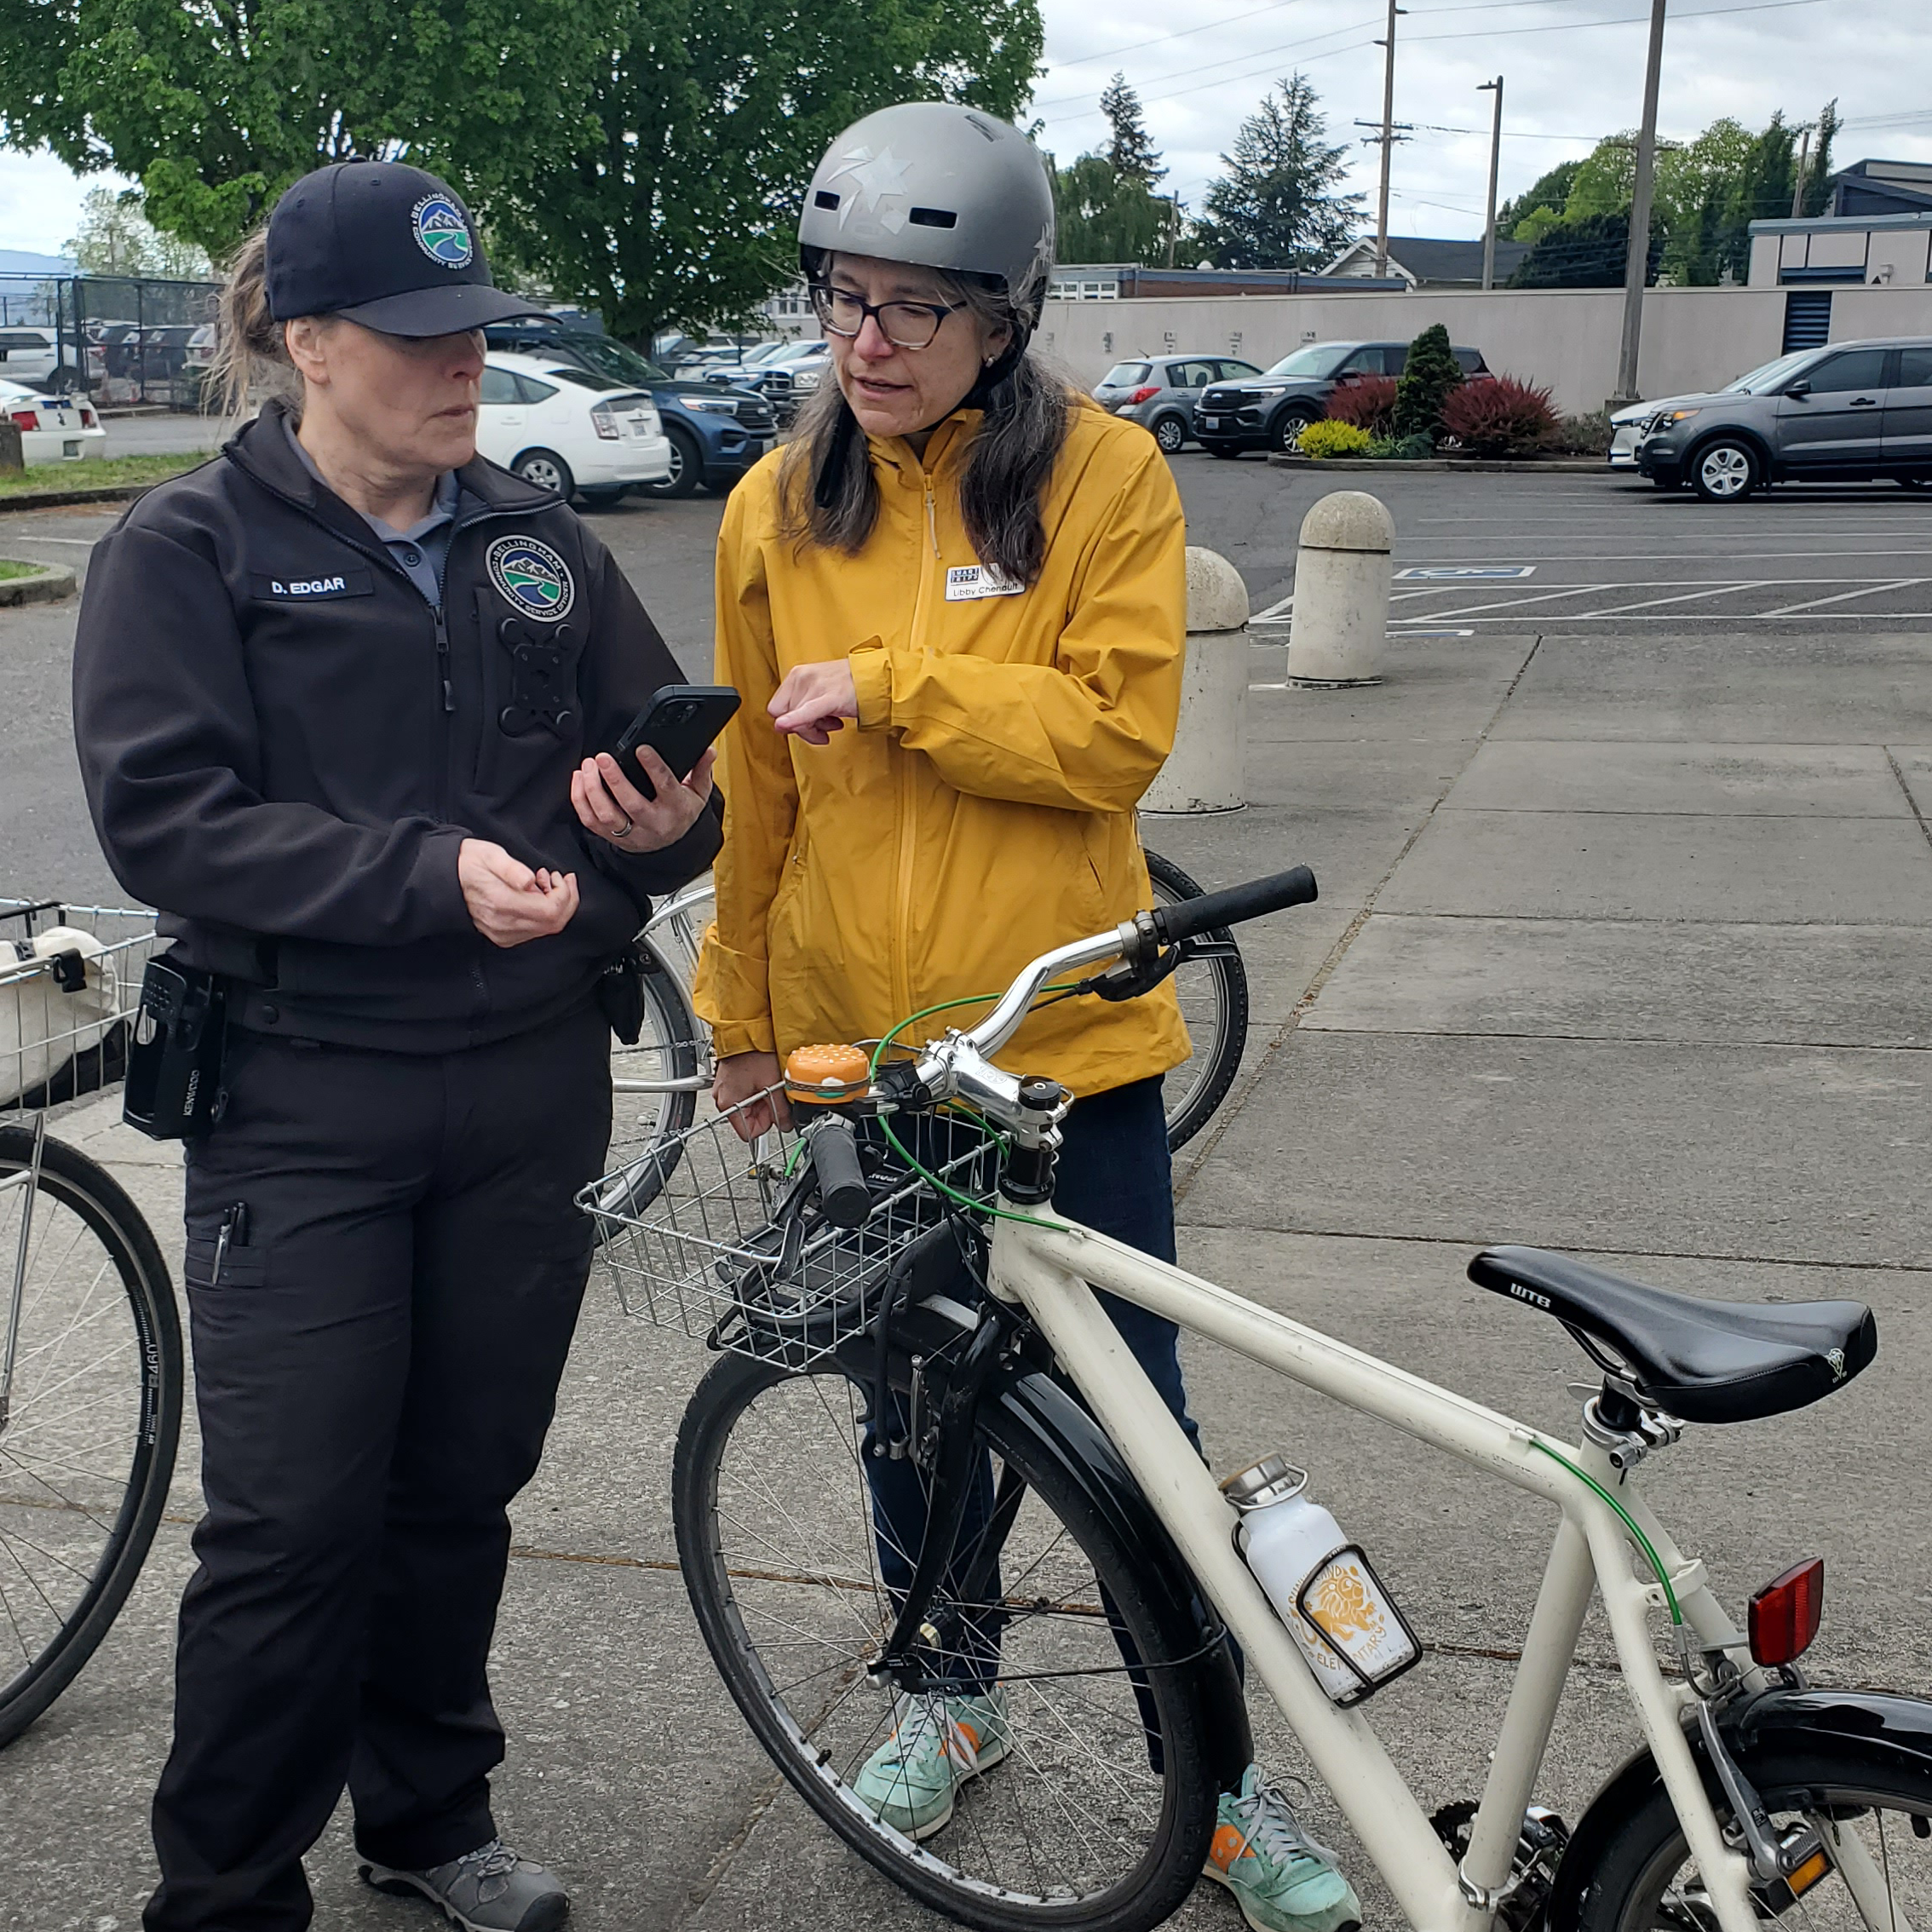 A police officer is taking to a person about registering their bicycle, white bike in foreground.